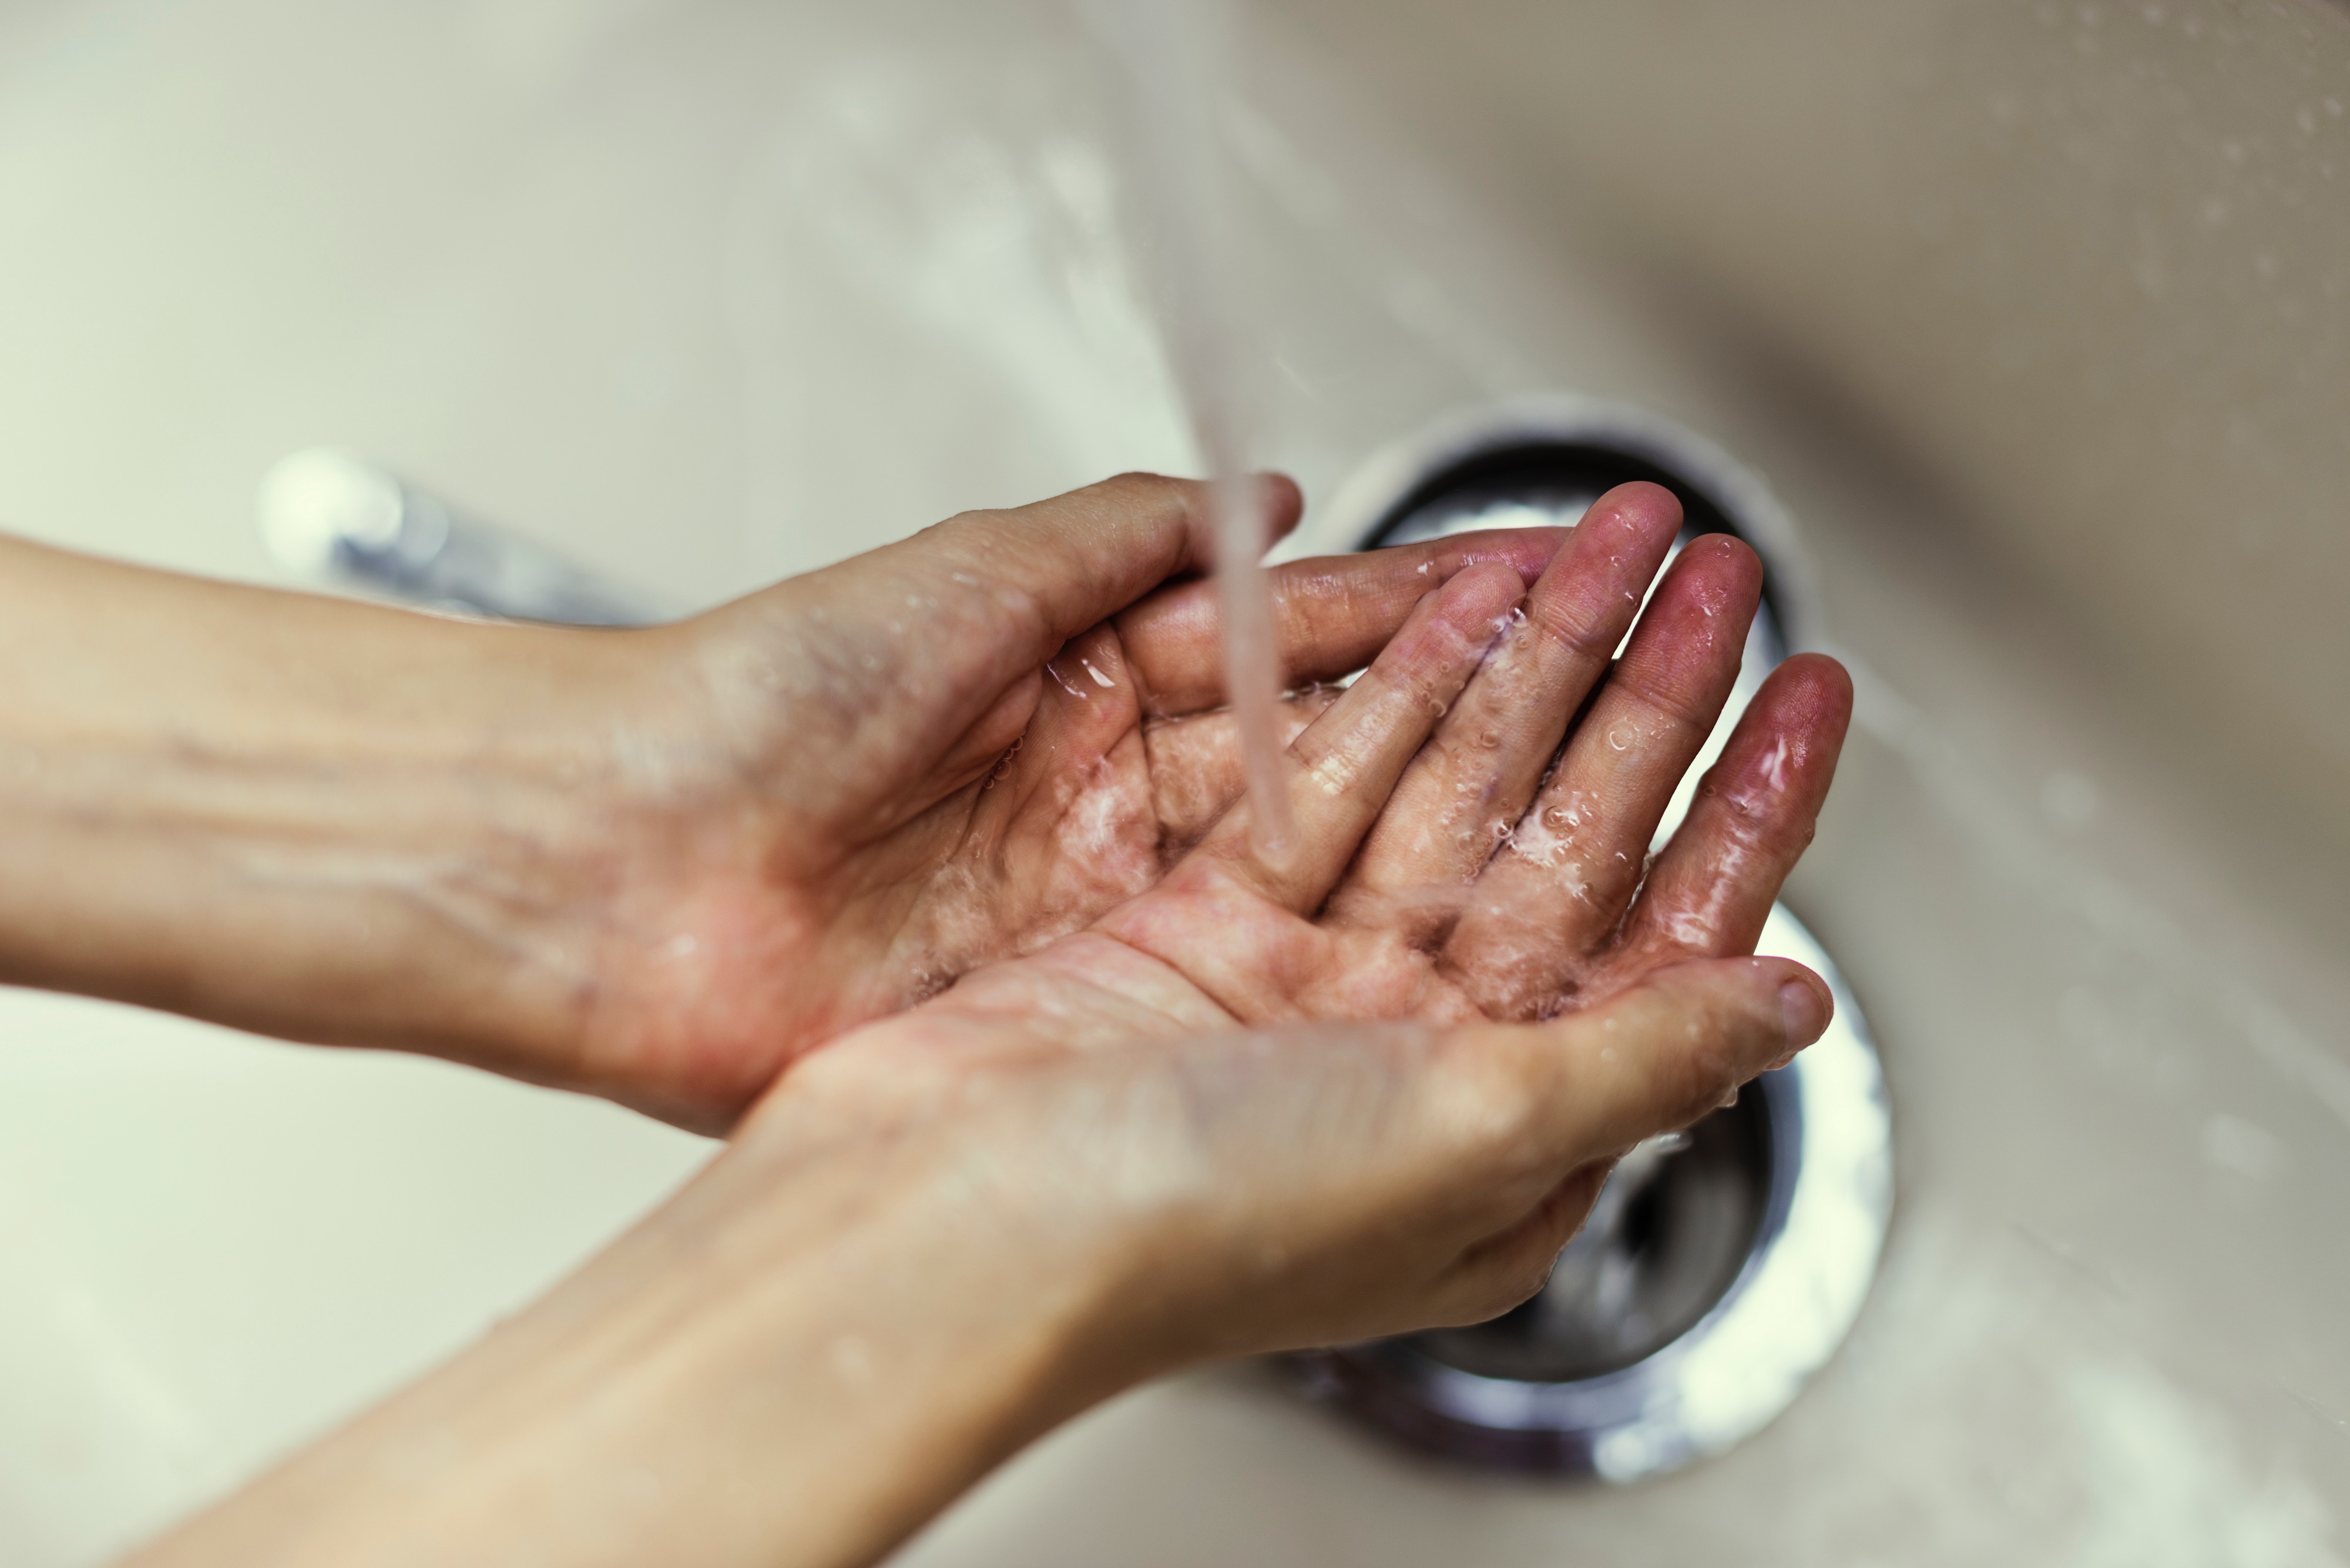 rinse hands with water